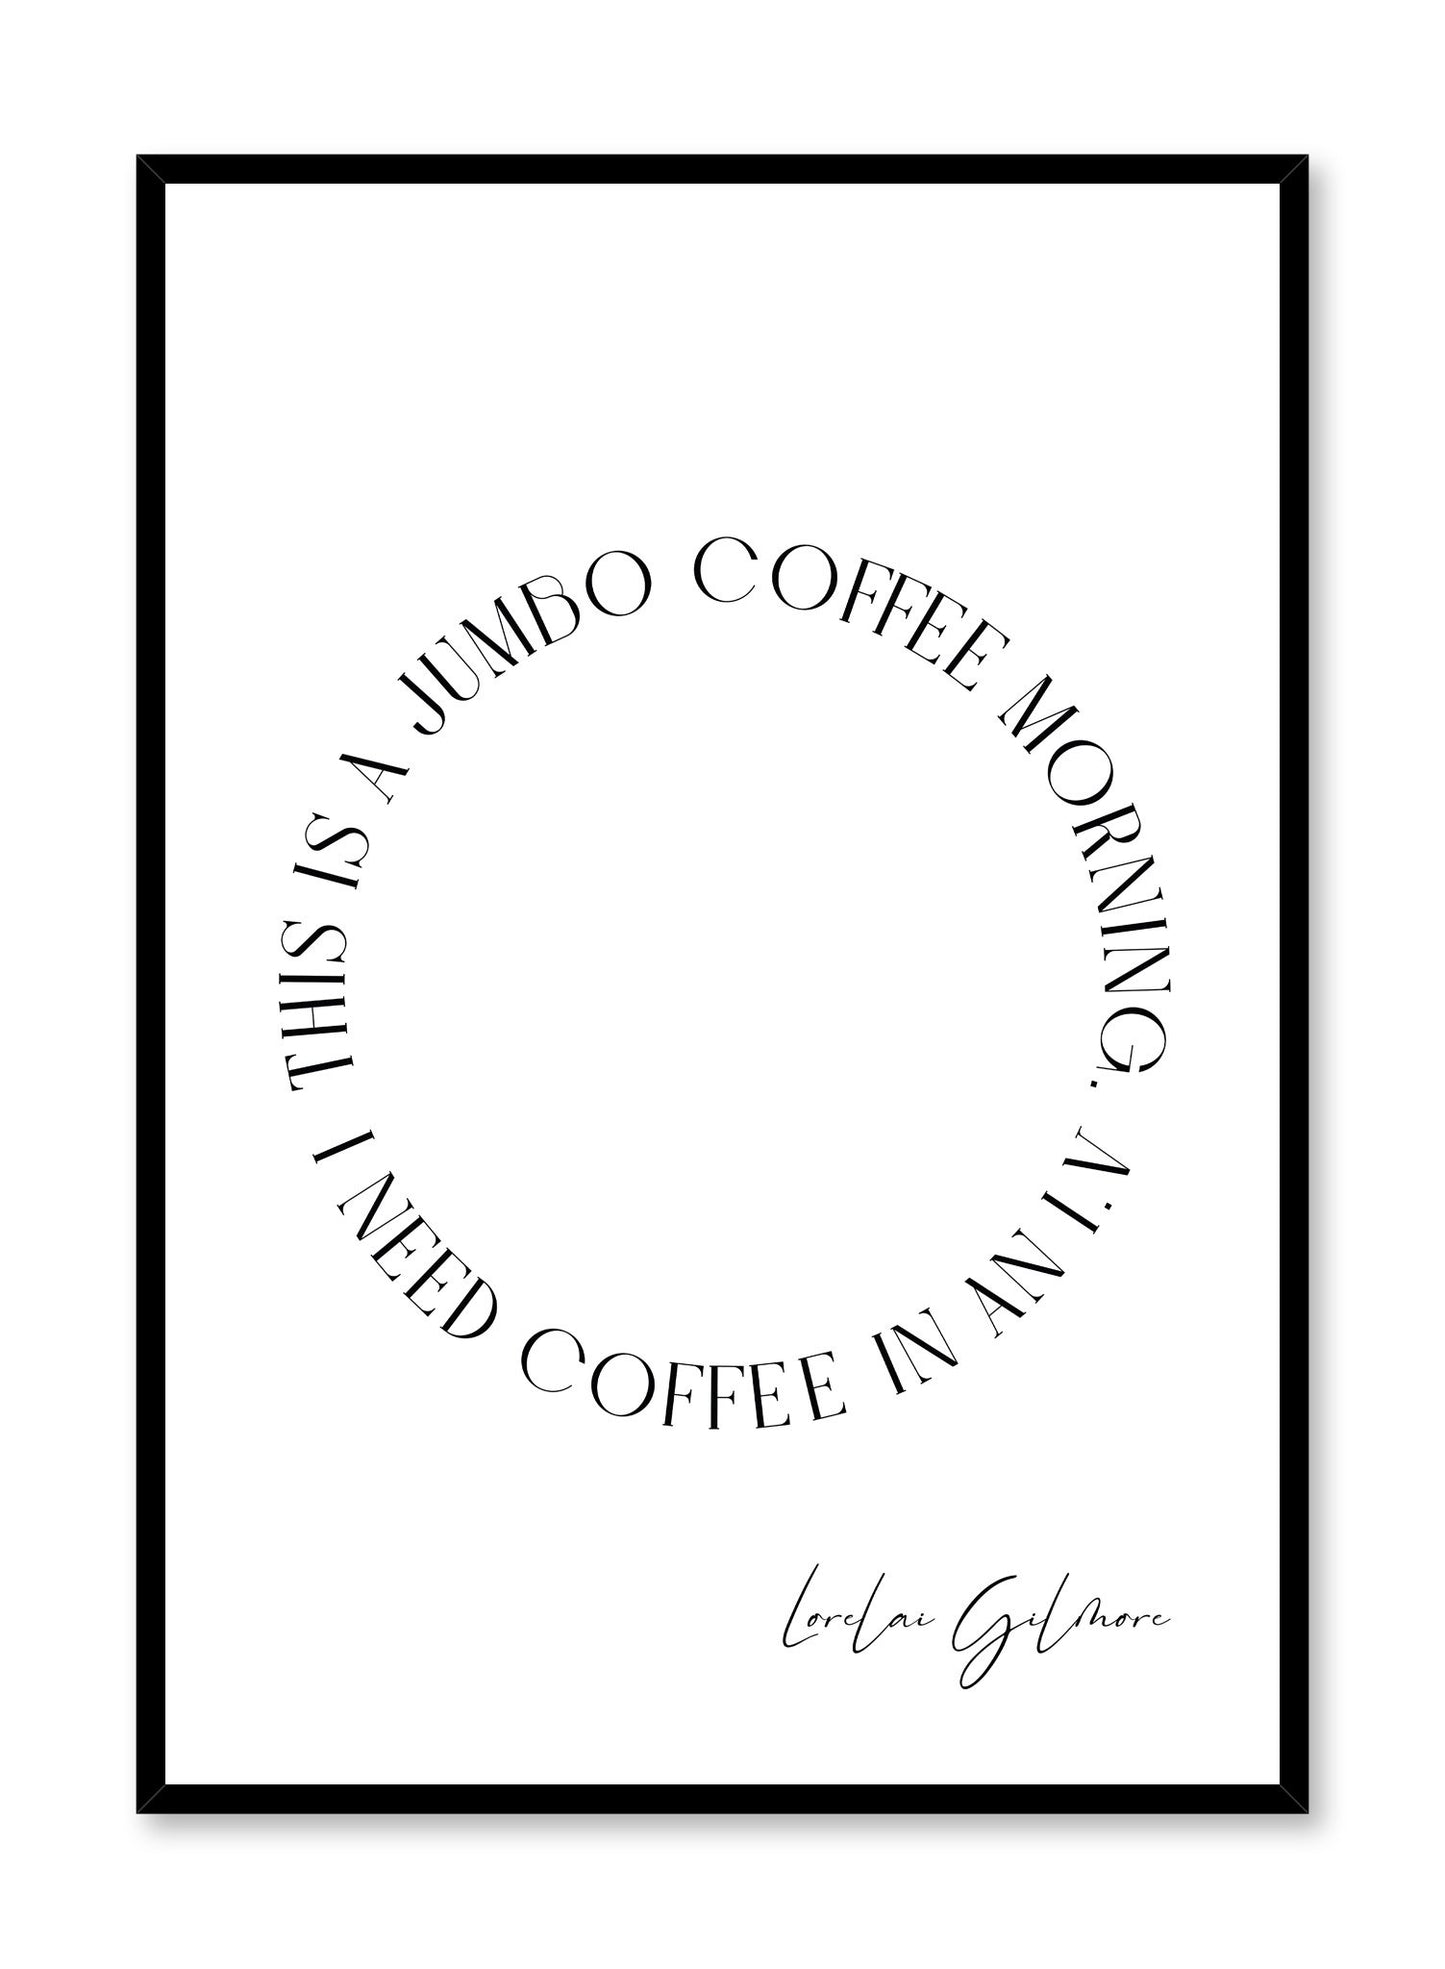 Lorelai Gets It is a coffee themed quote from Gilmore Girls and humorous typography poster by Opposite Wall.